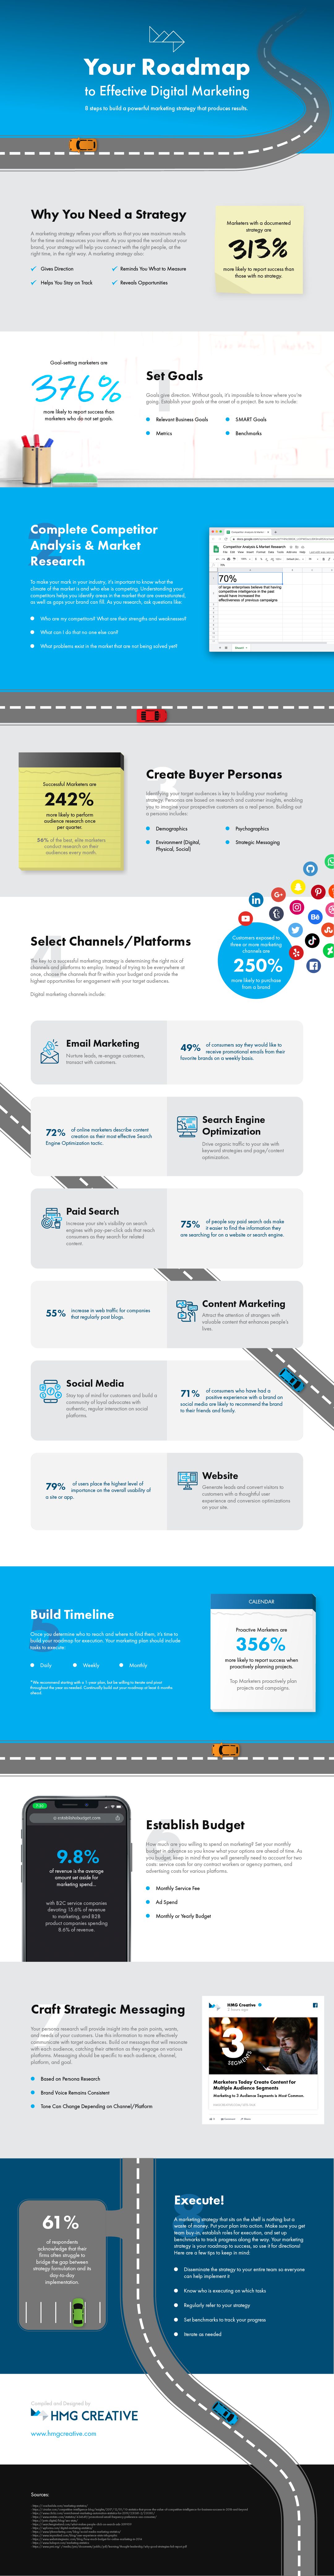 Your Roadmap to Effective Digital Marketing